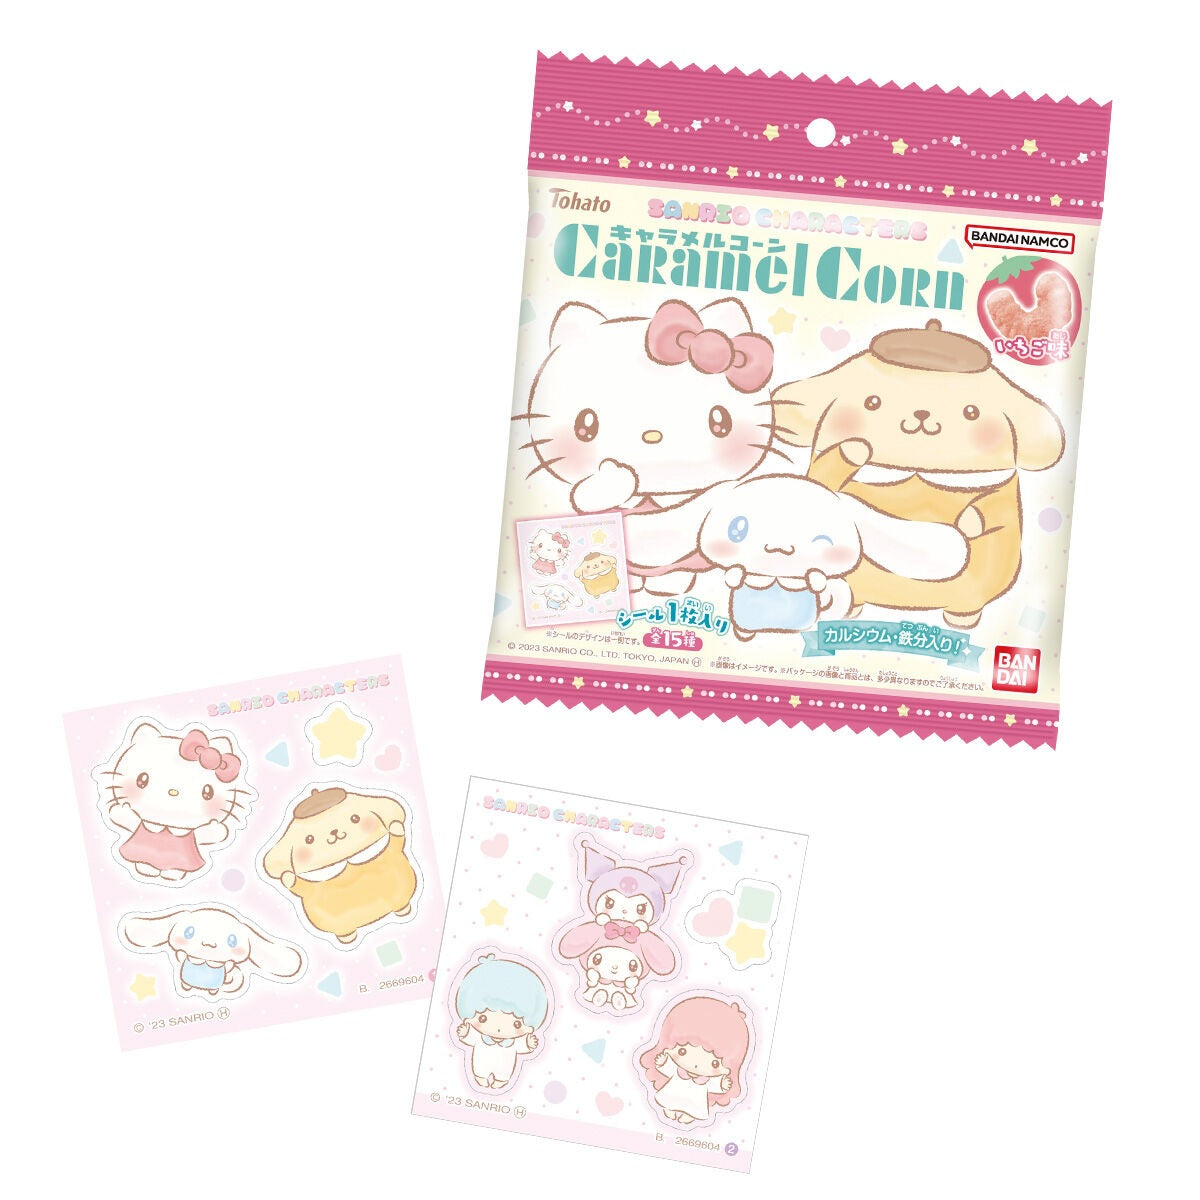 Caramel Corn Strawberry - Sanrio Characters special edition